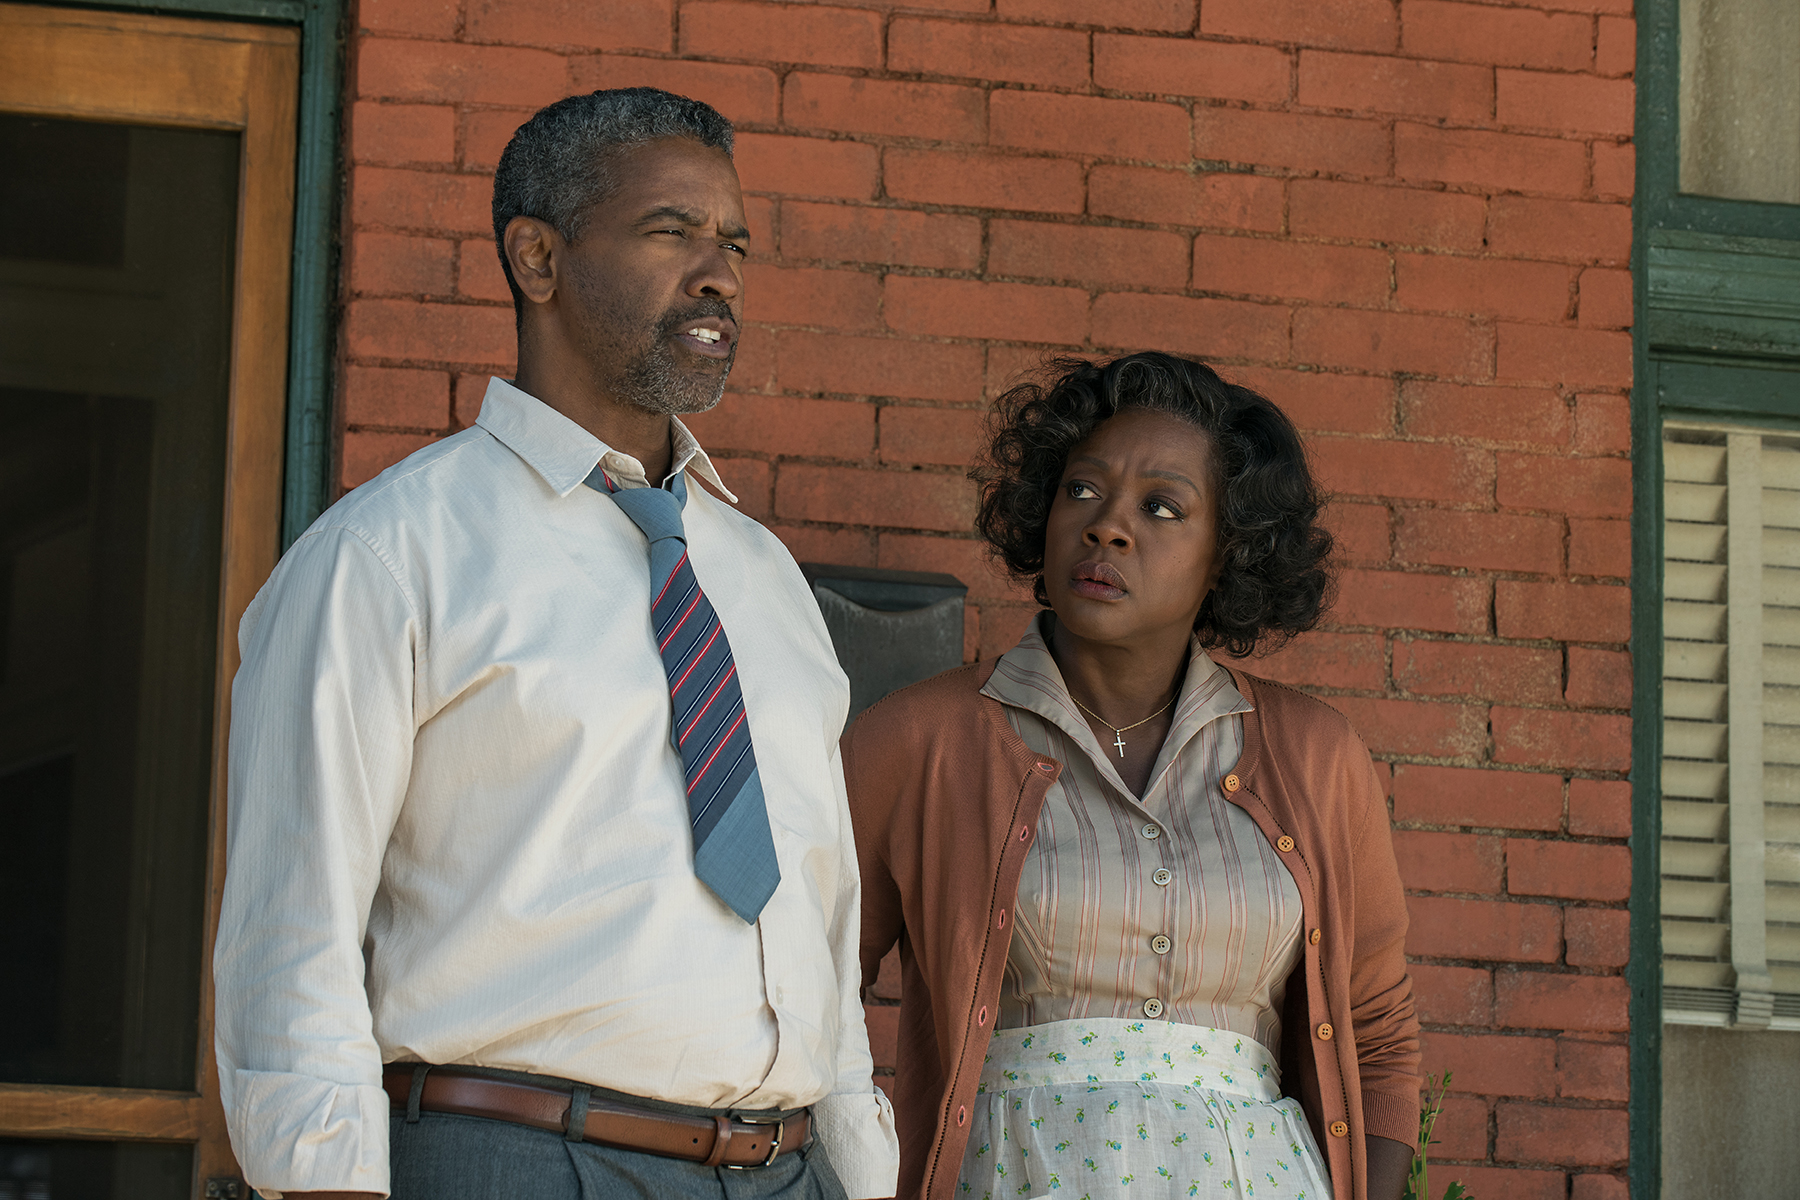 PHOTO: Denzel Washington plays Troy Maxson and Viola Davis plays Rose Maxson in Fences from Paramount Pictures. Directed by Denzel Washington from a screenplay by August Wilson. 